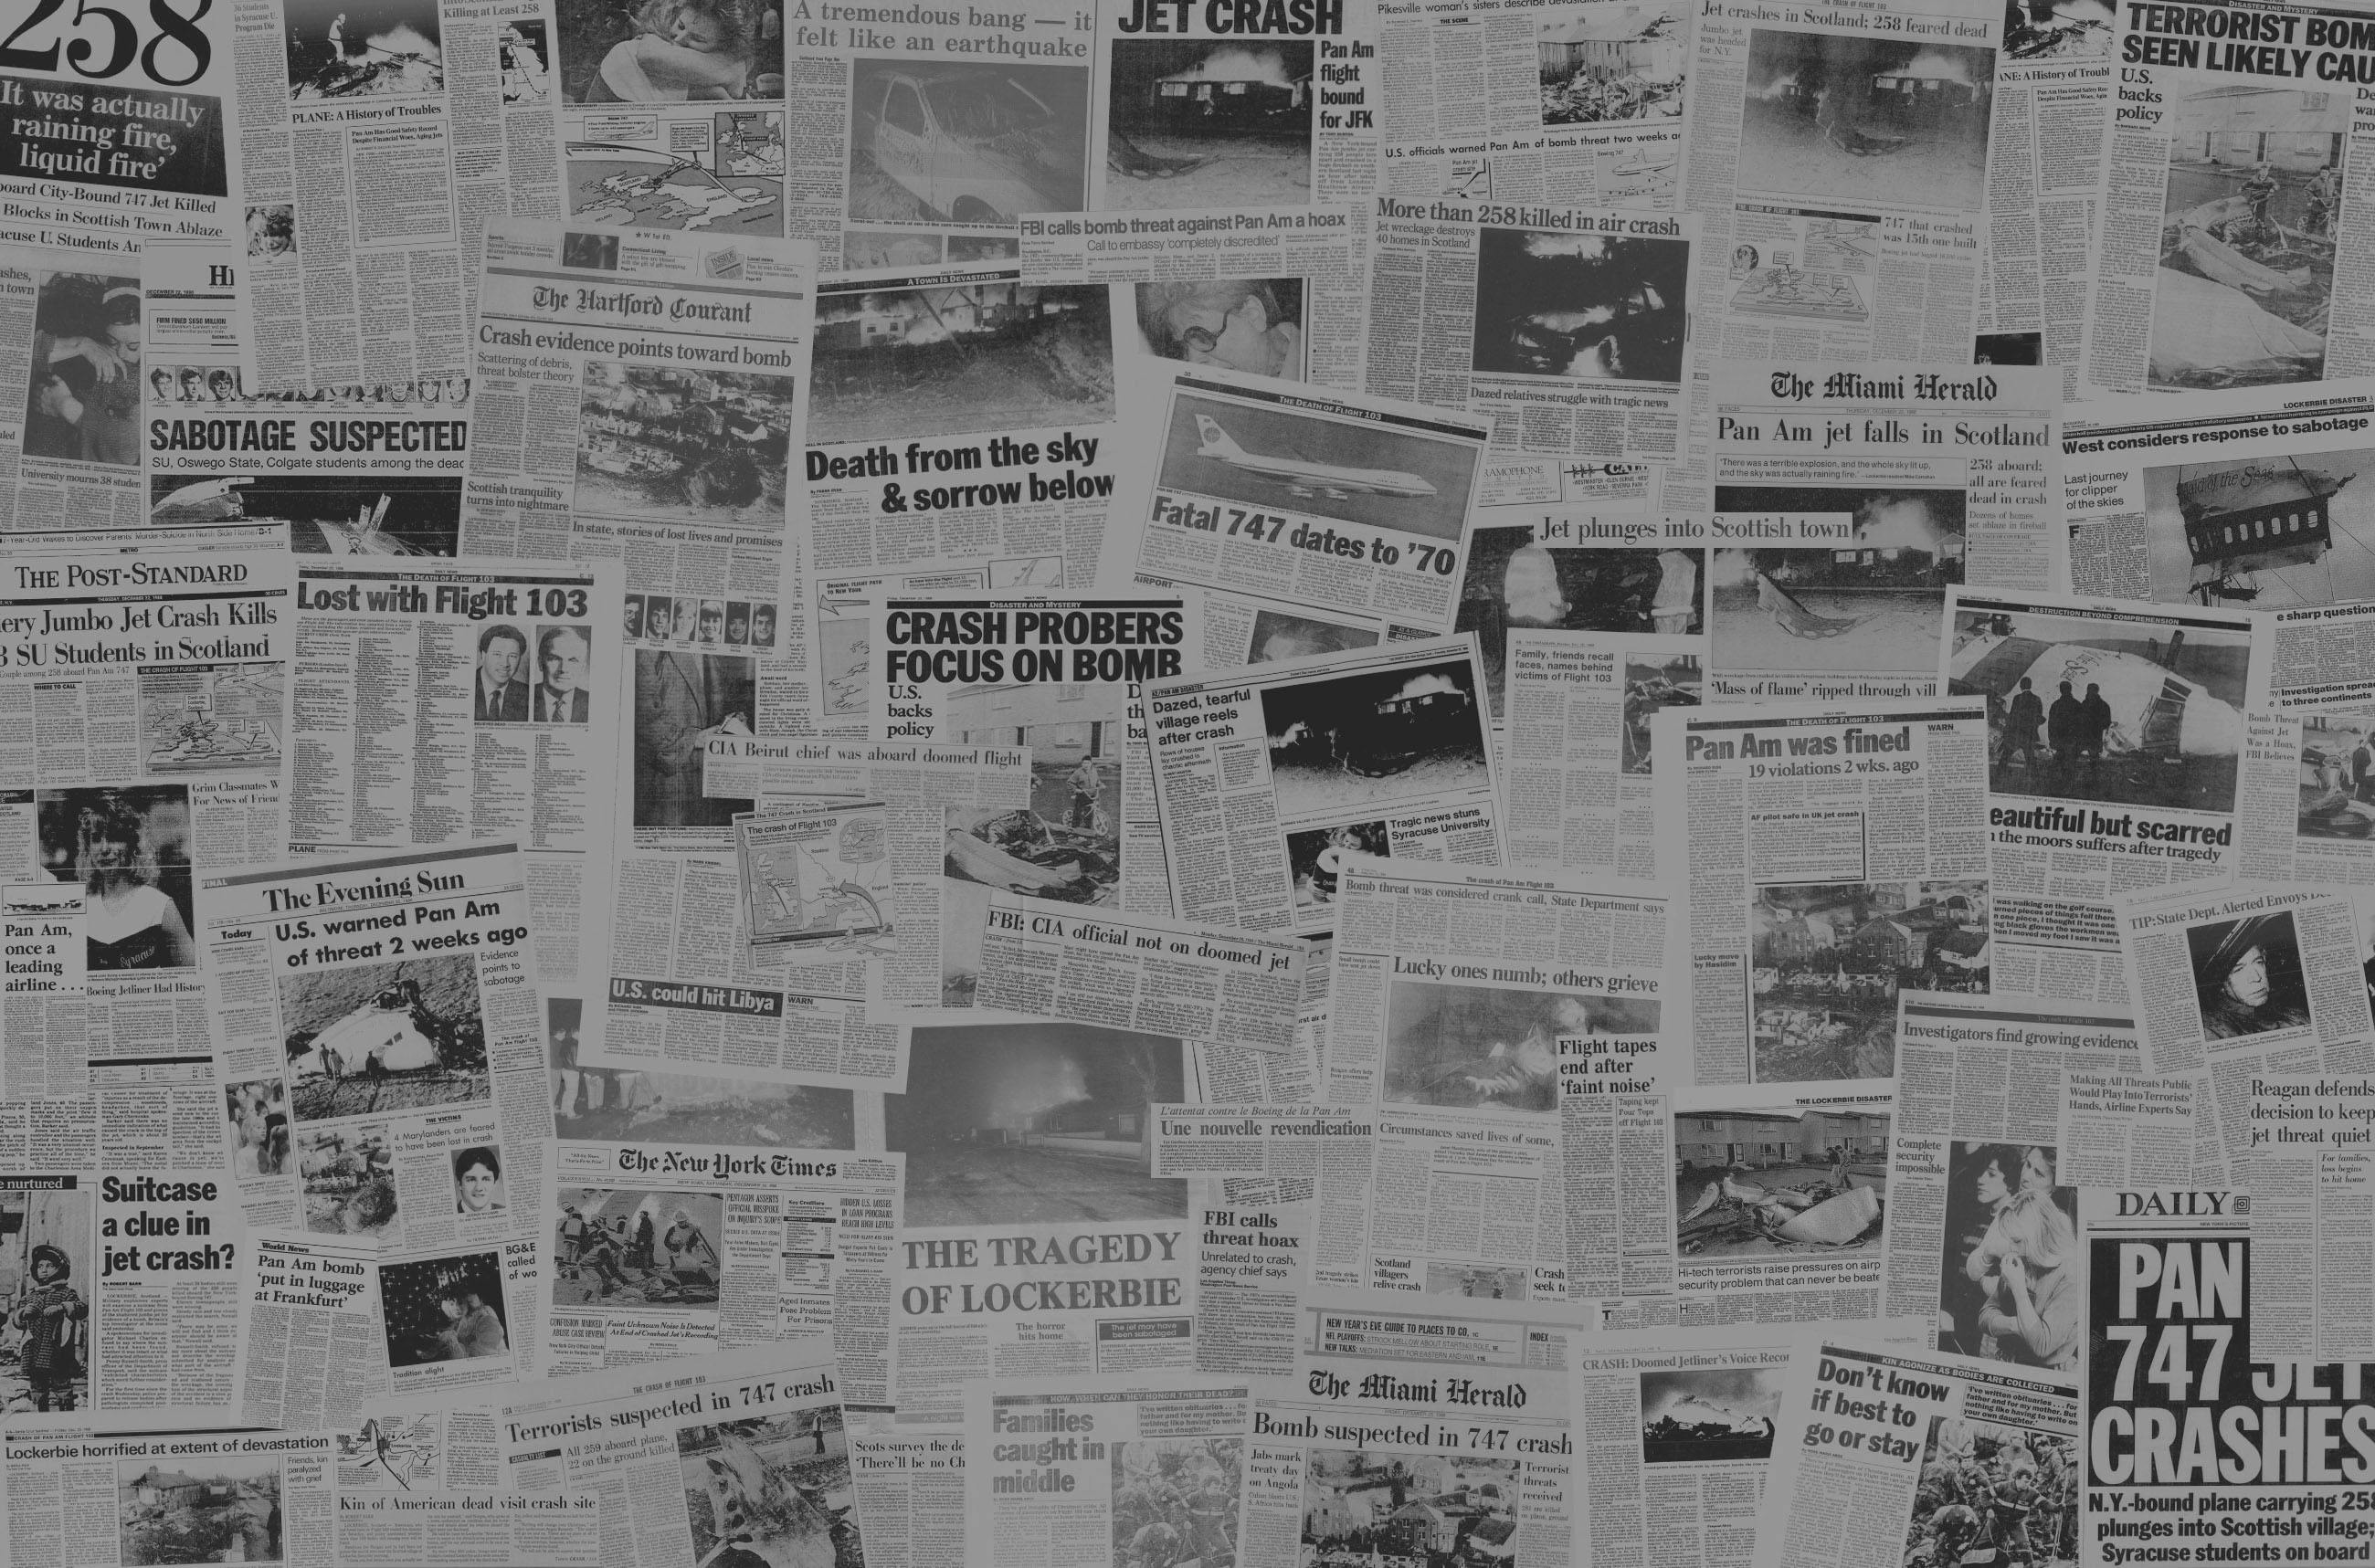 Collage of newspaper headlines about the 1988 terrorist bombing of Pan Am flight 103